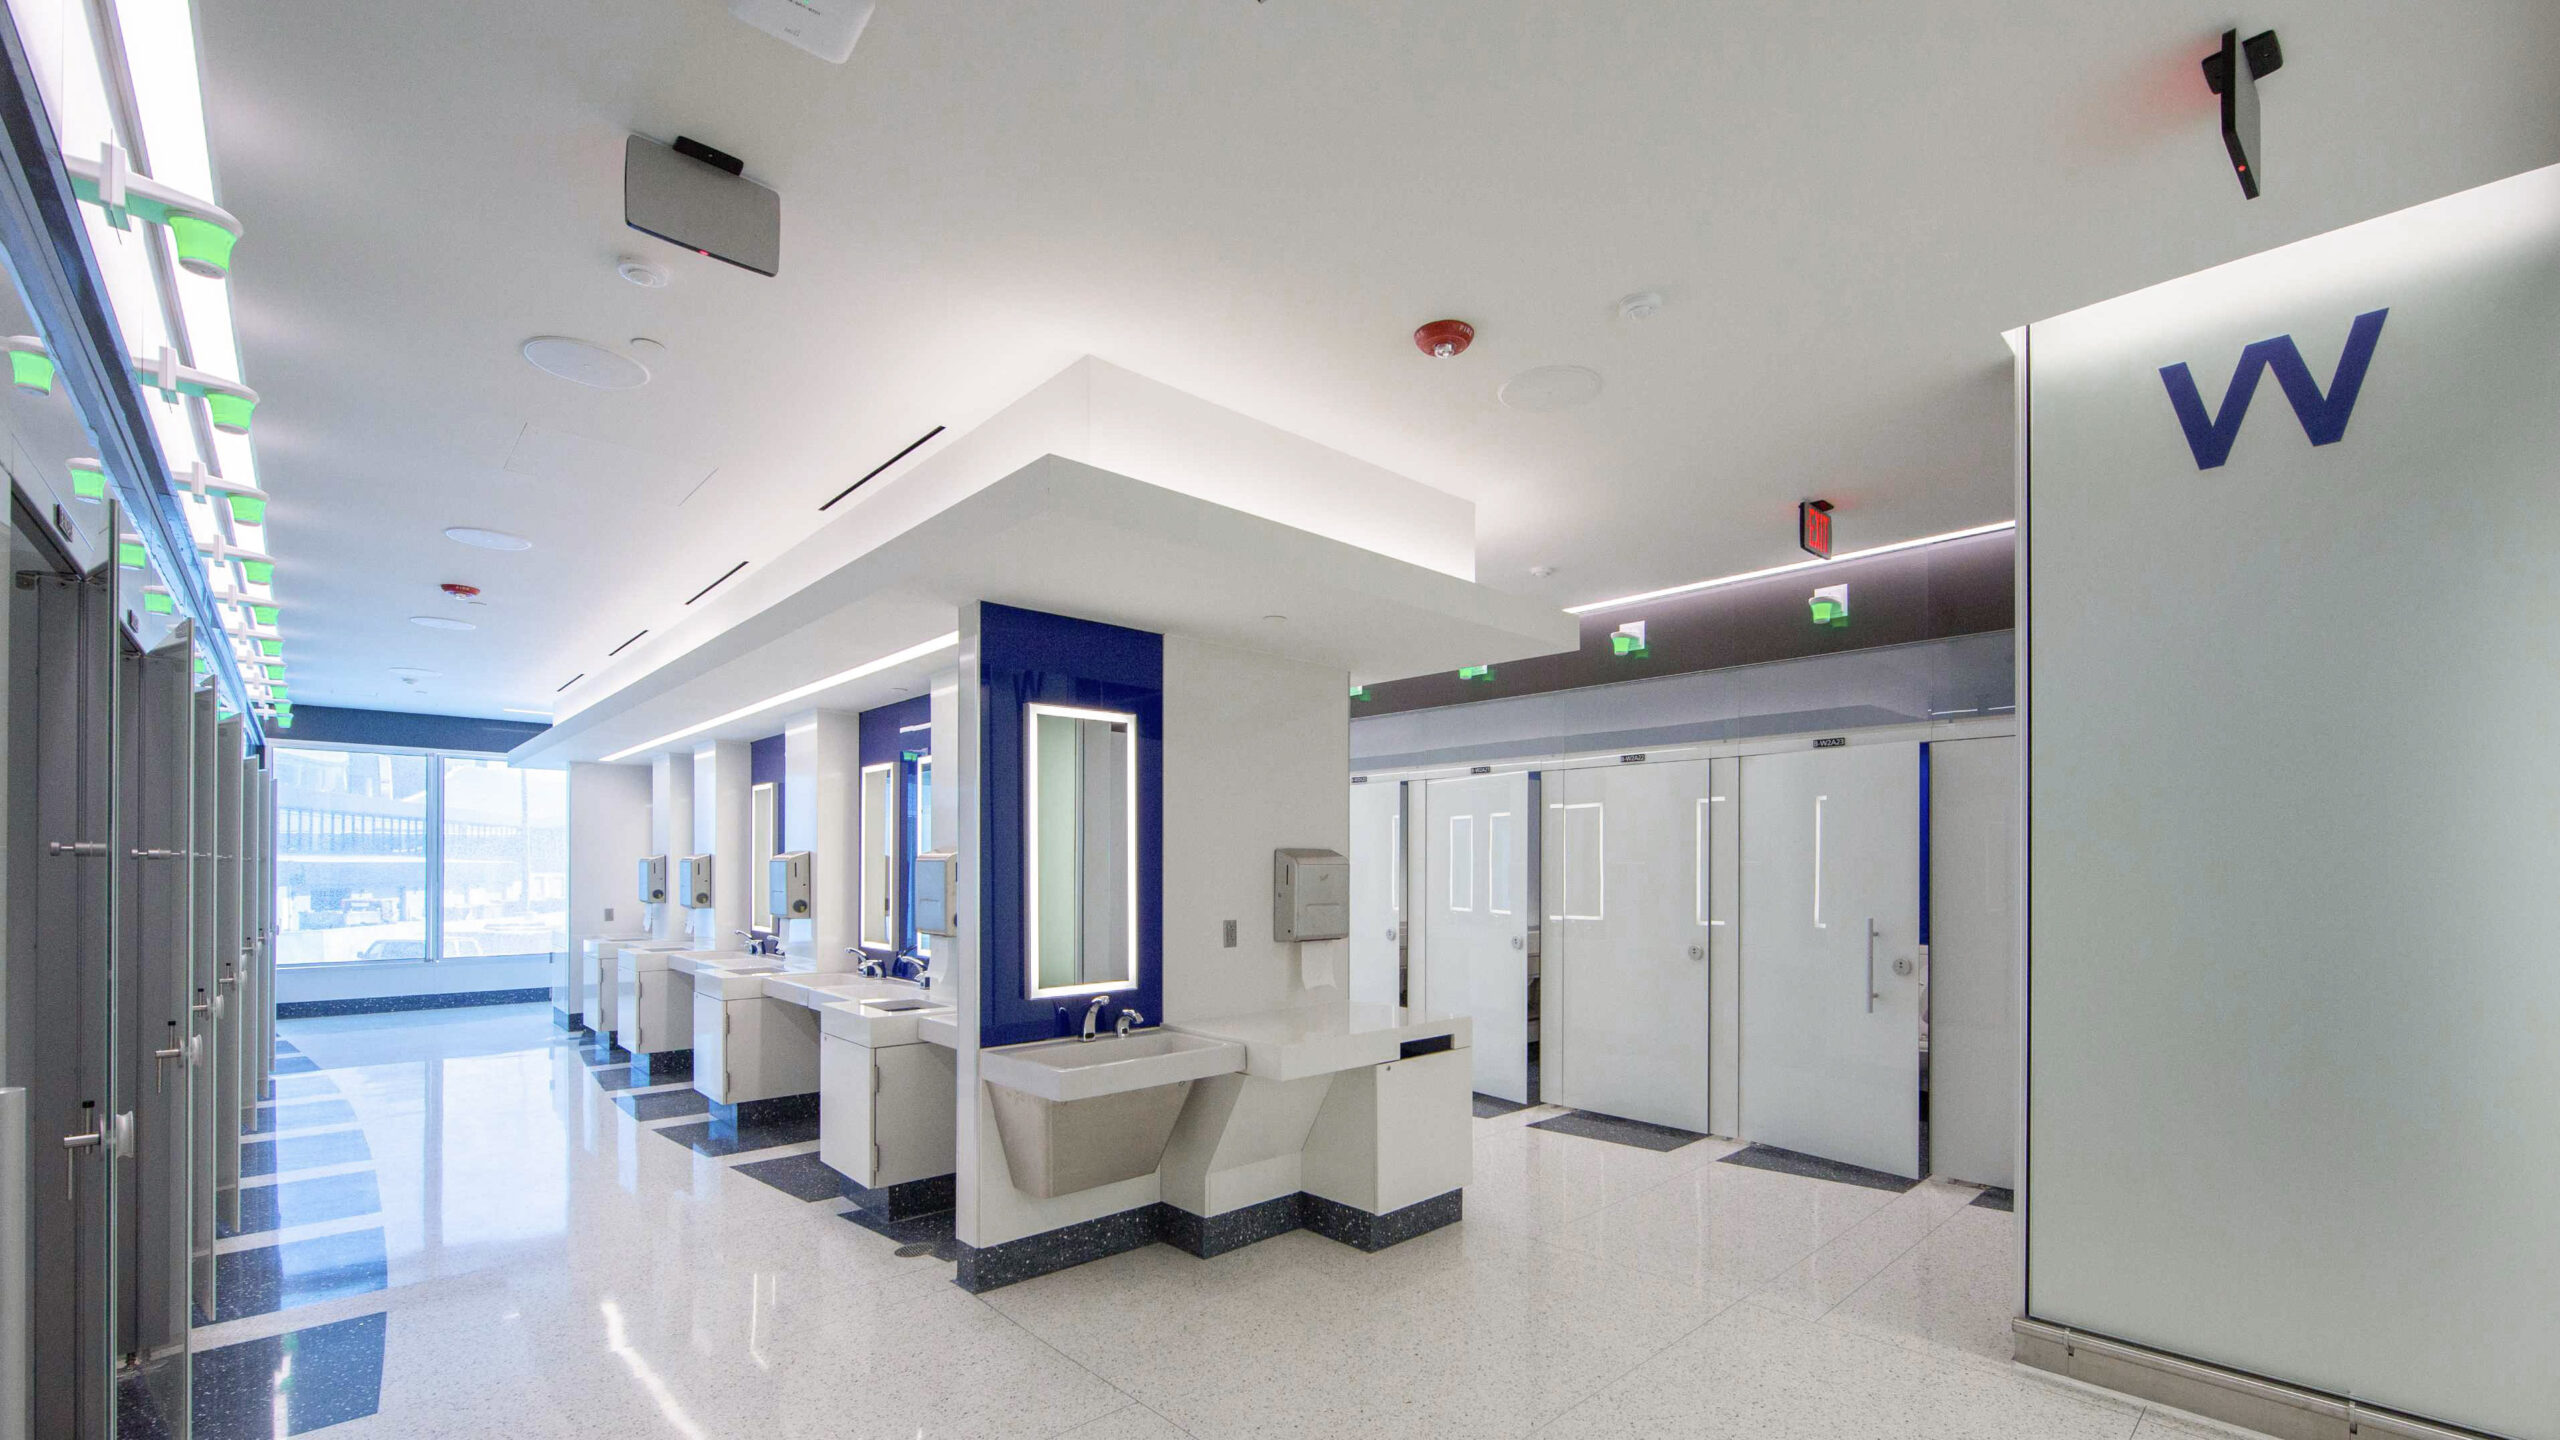 Photo of the interior of a recently renovated women's restroom at BWI Marshall Airport